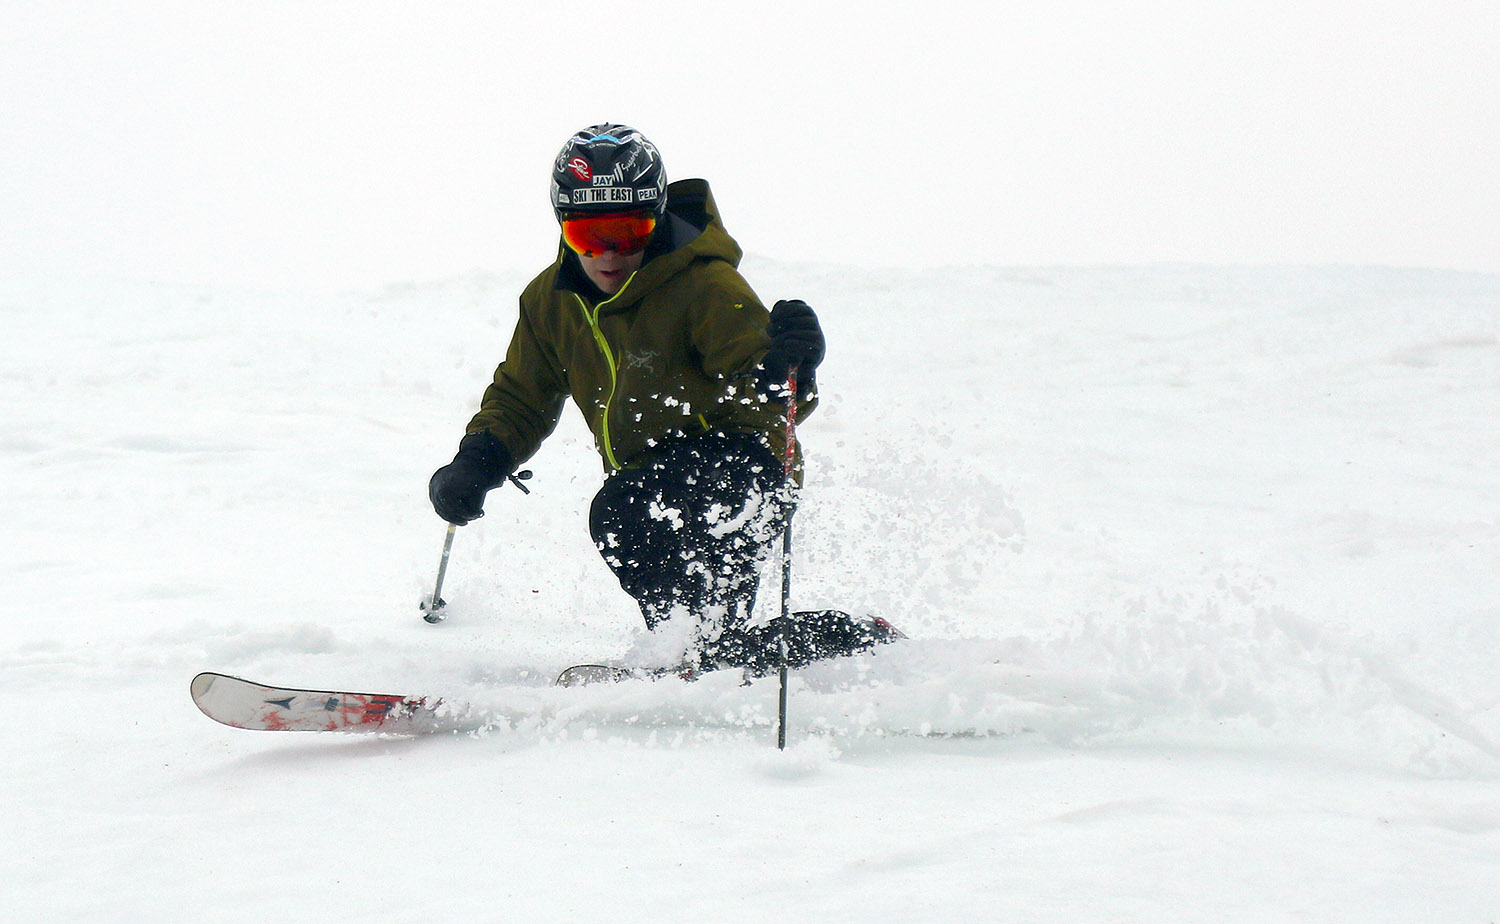 An image of Jay making a Telemark turn in some early spring snow in the Timberline area at Bolton Valley Ski Resort in Vermont